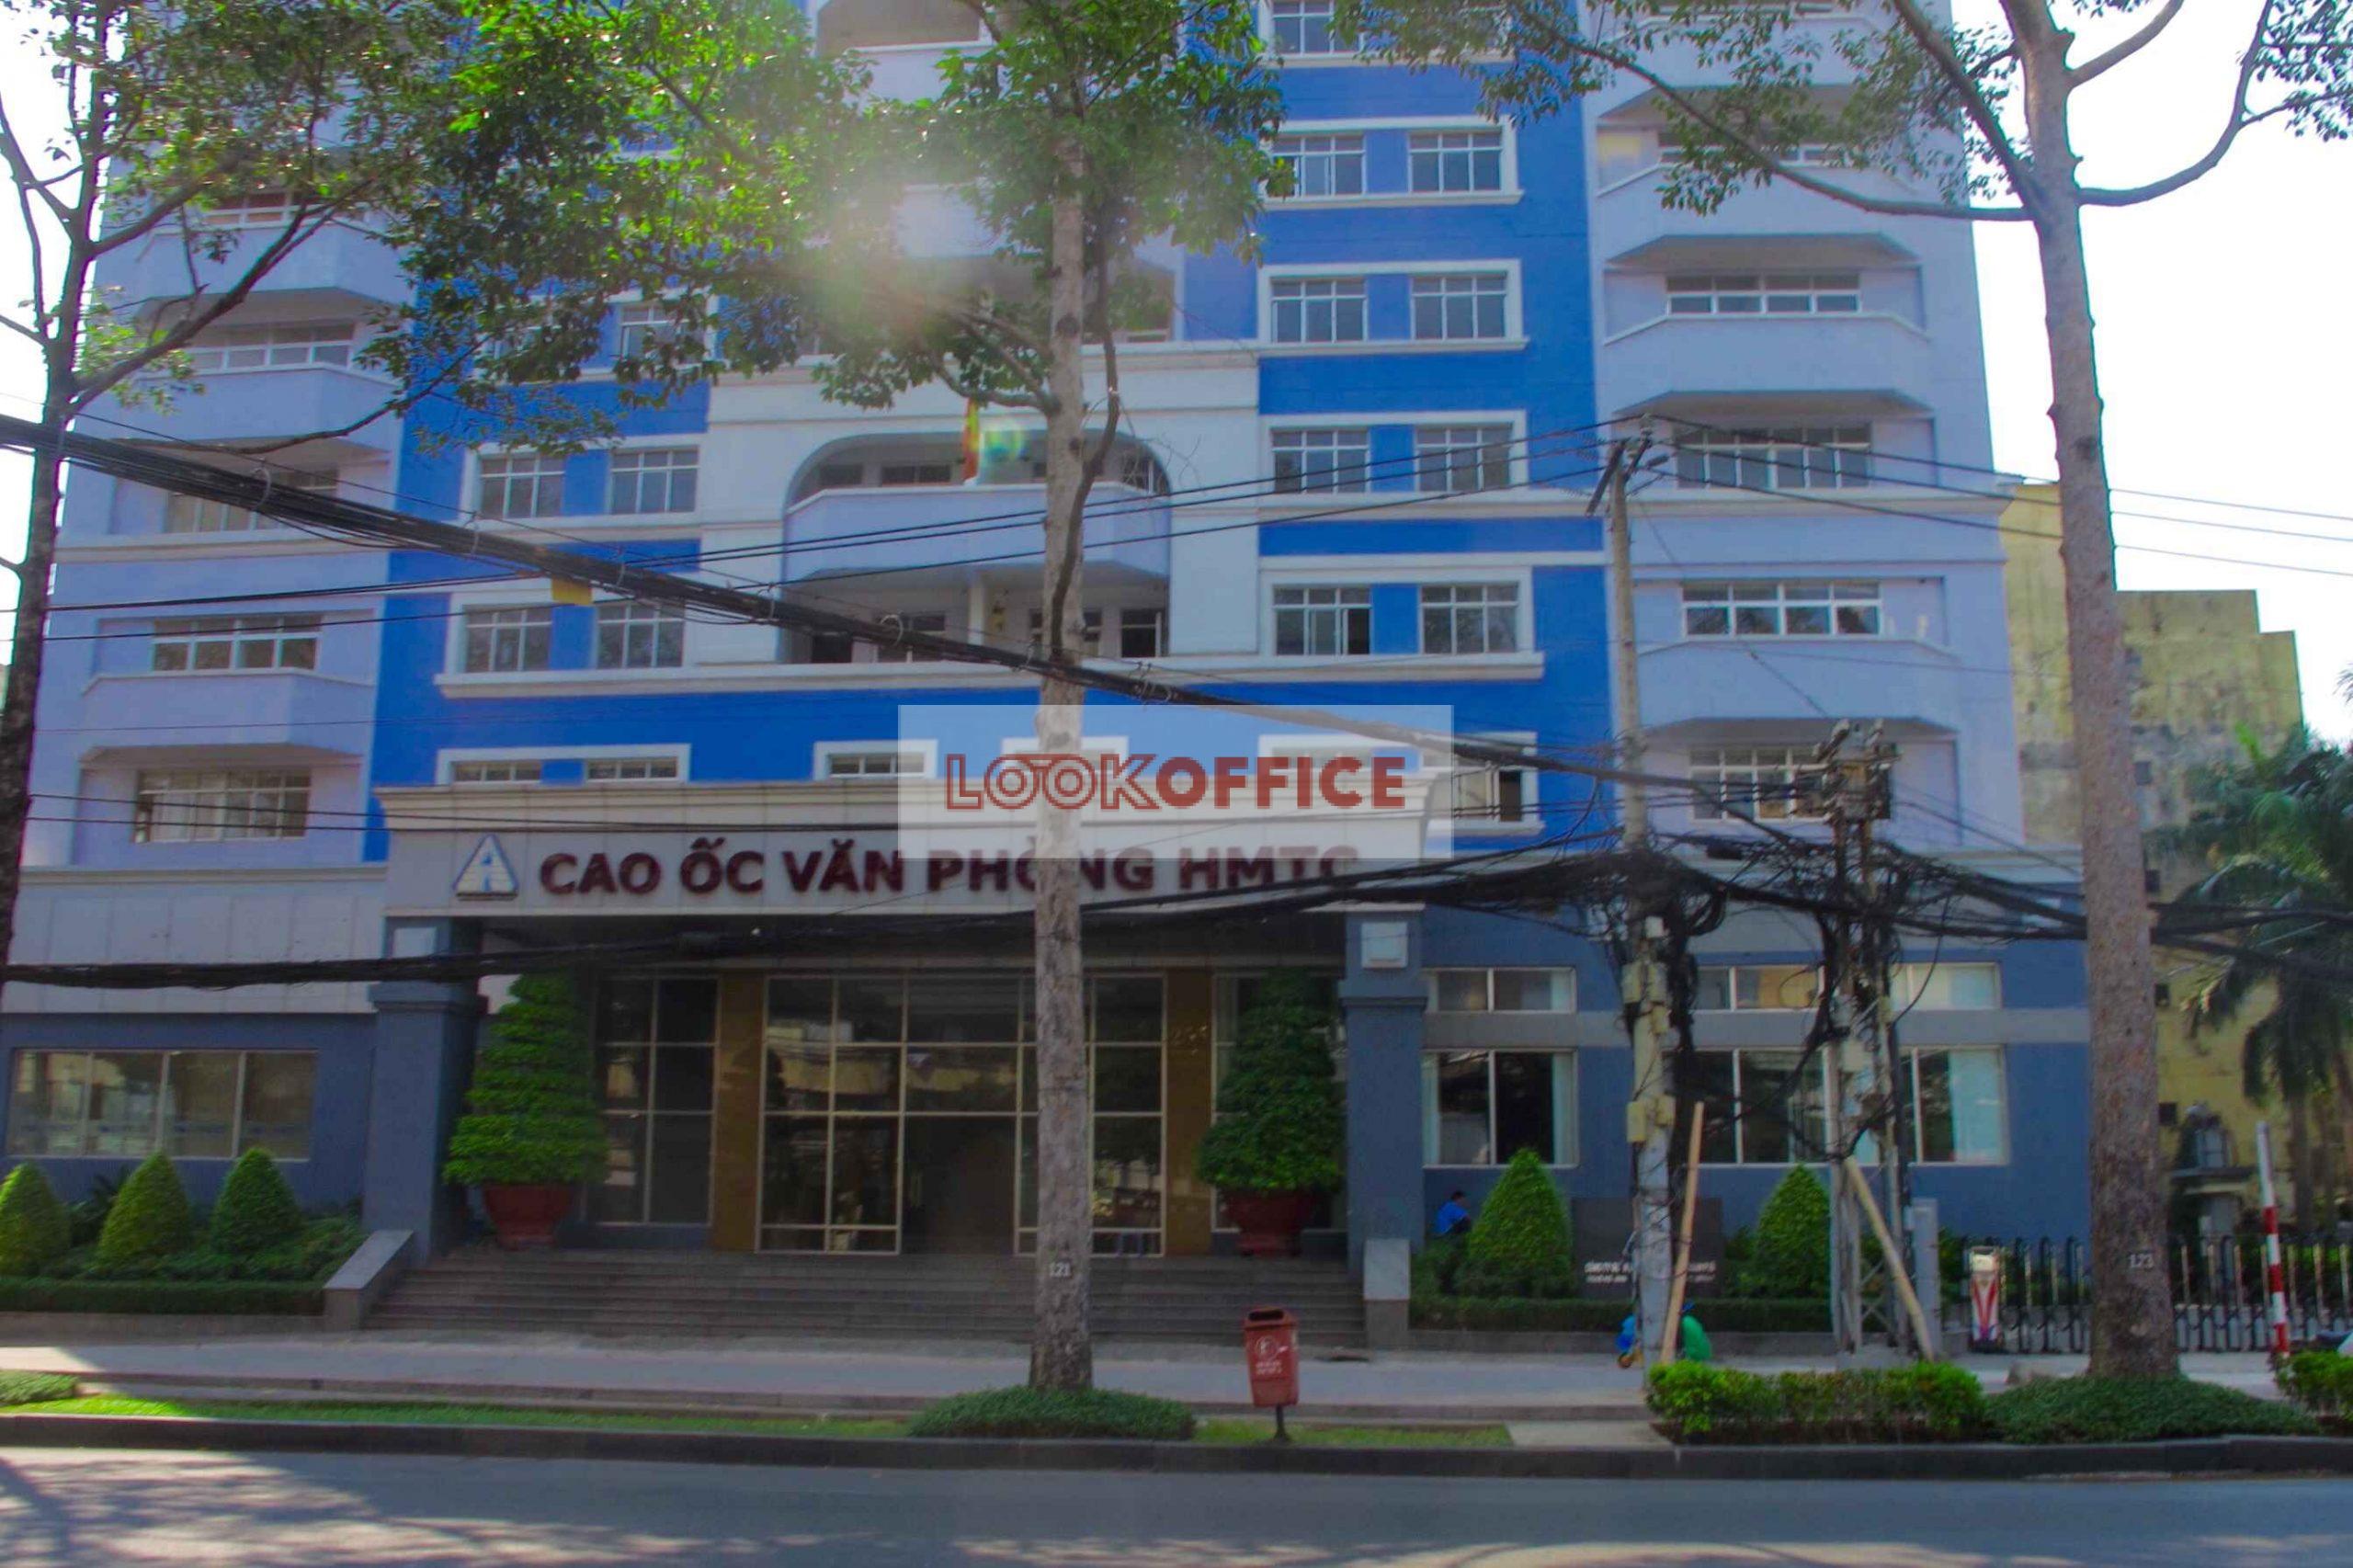 hmtc thd office for lease for rent in district 1 ho chi minh